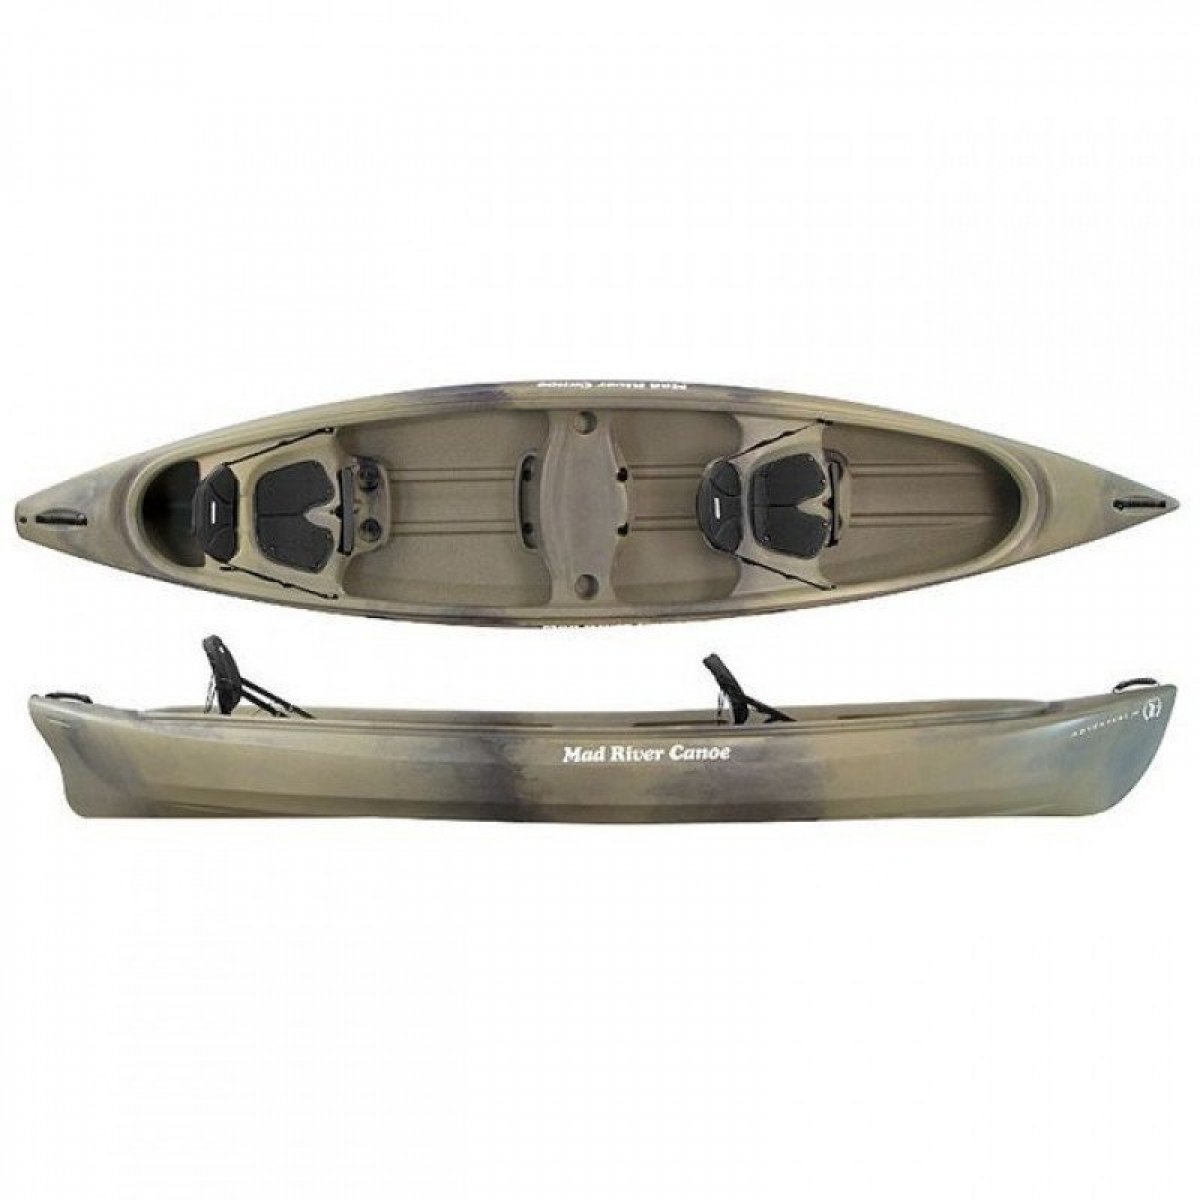 Brand new Mad River Adventure 14 3 seater canadian canoe in stock